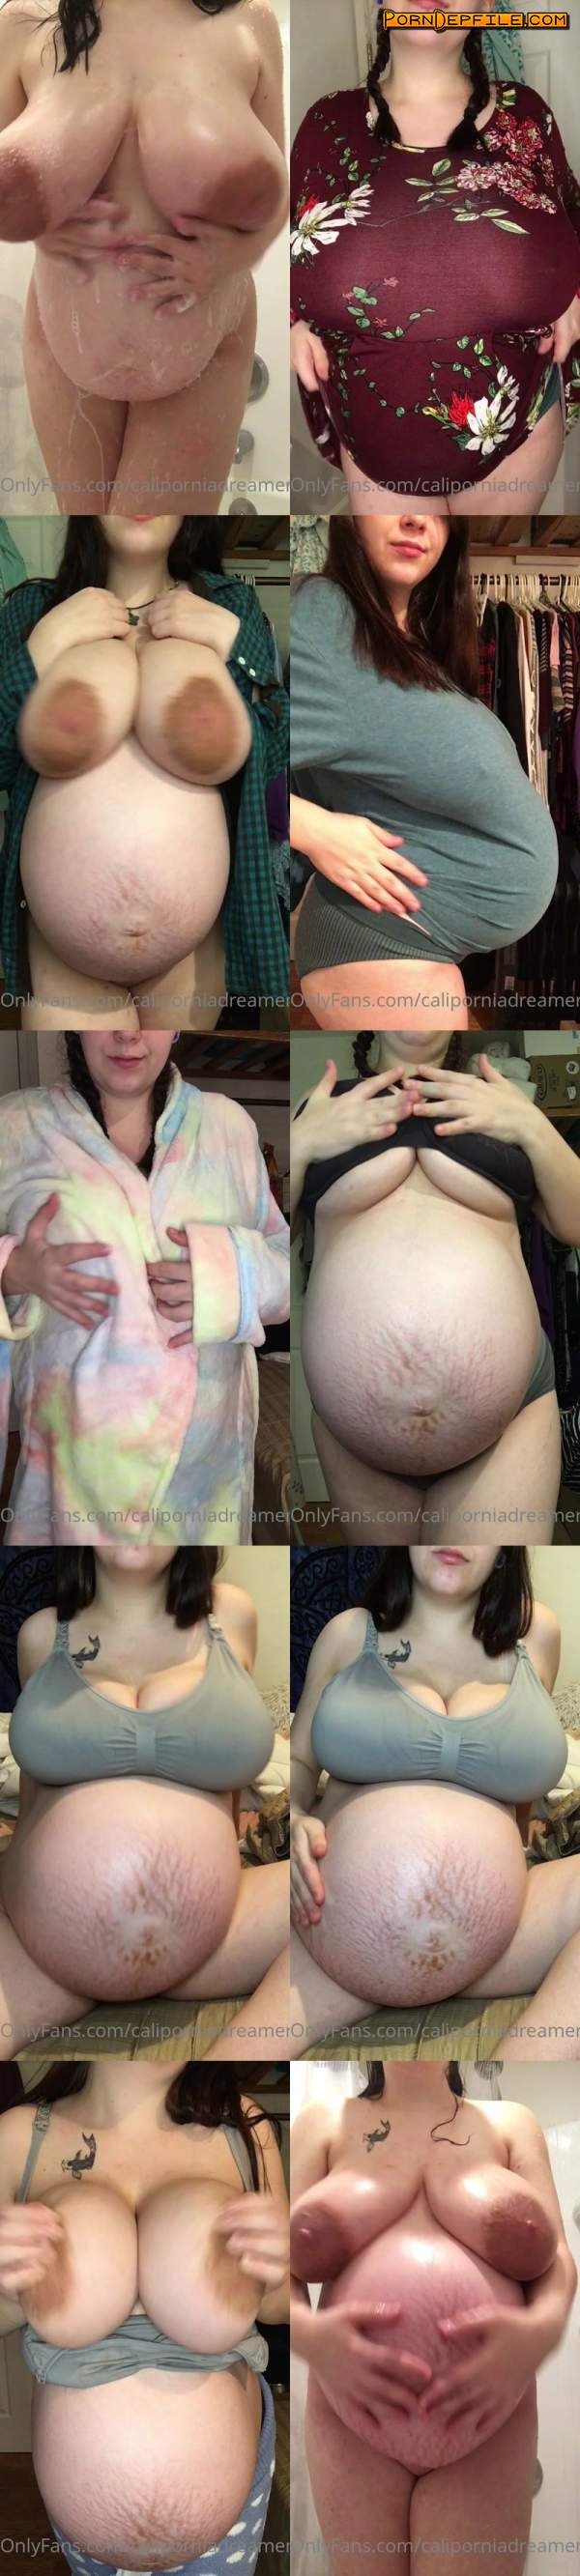 Onlyfans: Caliporniadreamer - Fan Compilation 2 (HD Porn, Solo, Fetish, Pregnant) 1280p